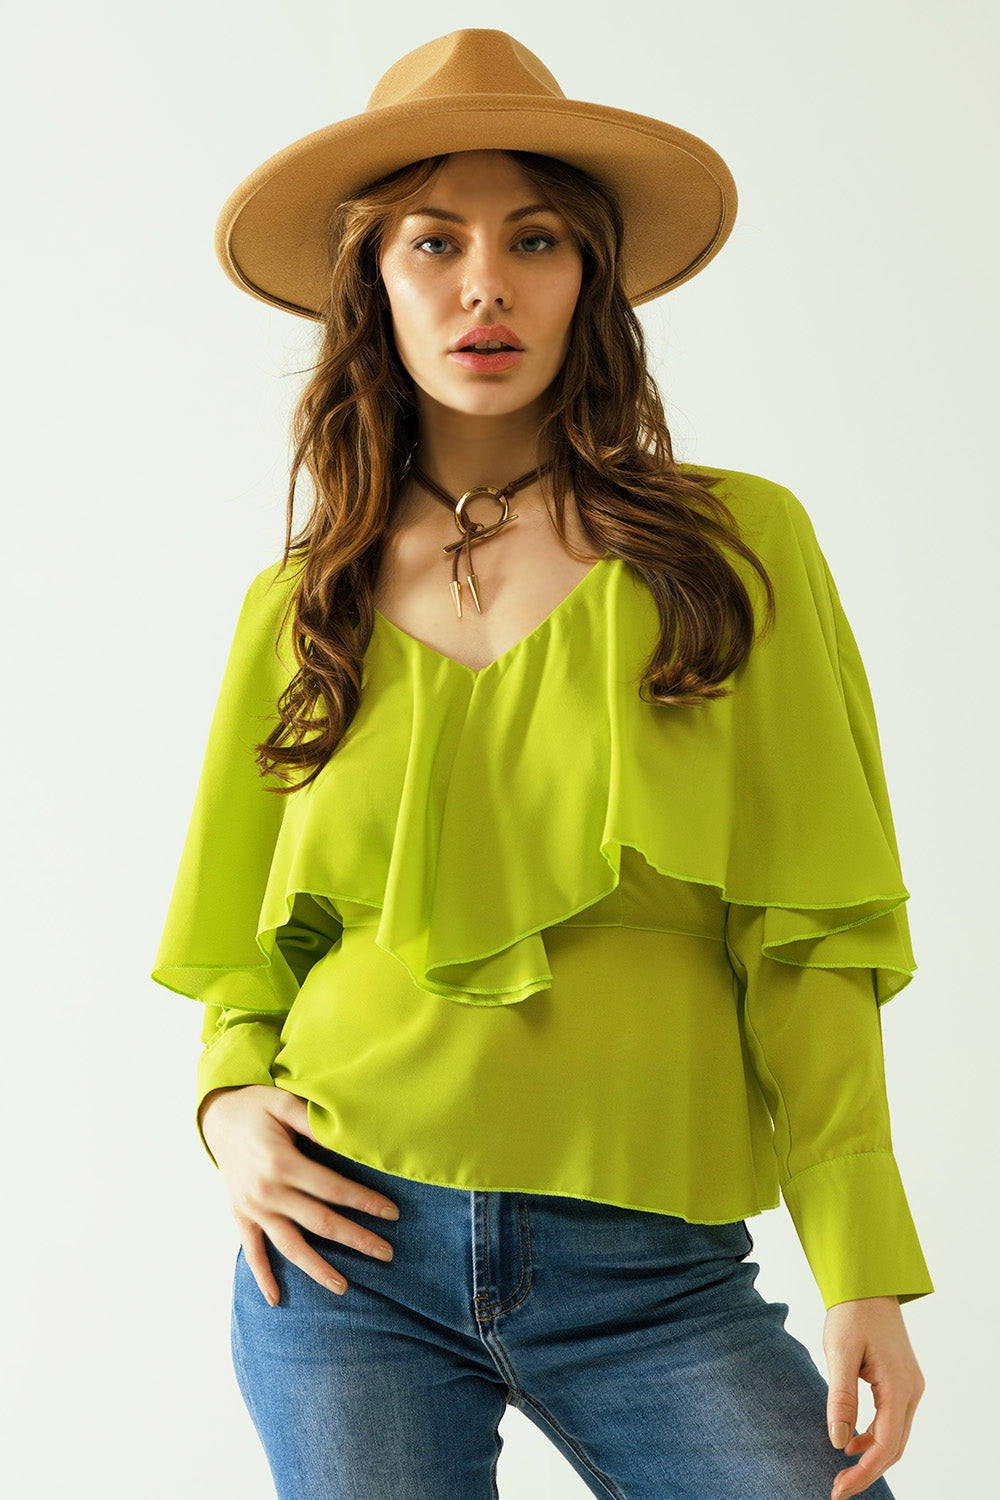 Q2 Green long sleeve top with a ruffle detail and bare back